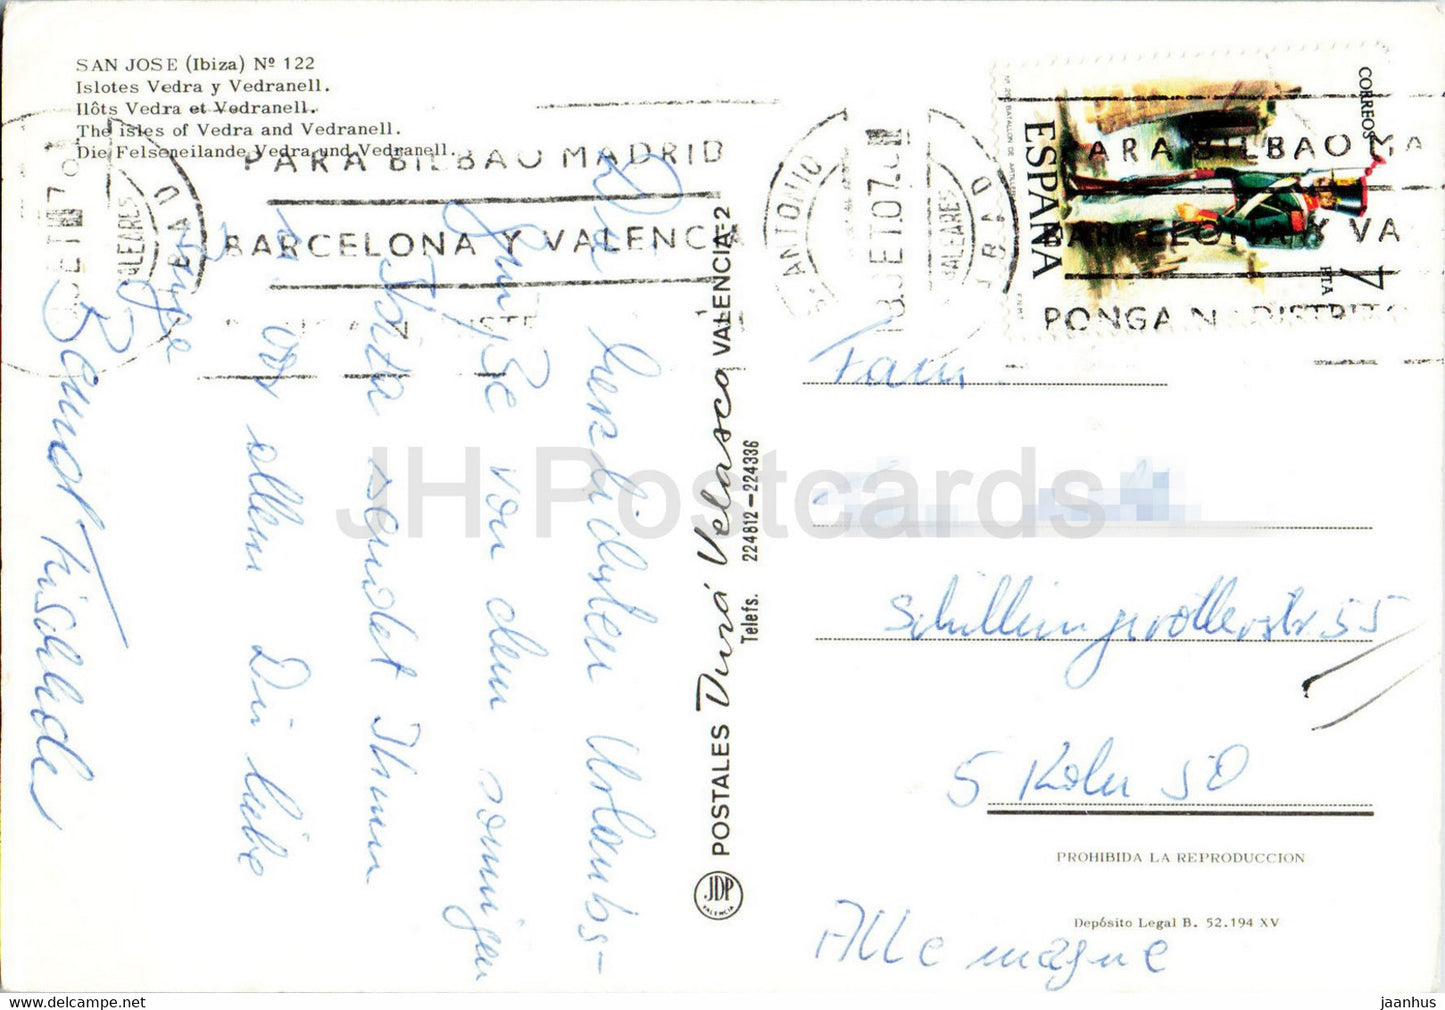 San Jose - Islotes Vedra y Vedranell - Island - Ibiza - 122 - Spain - used